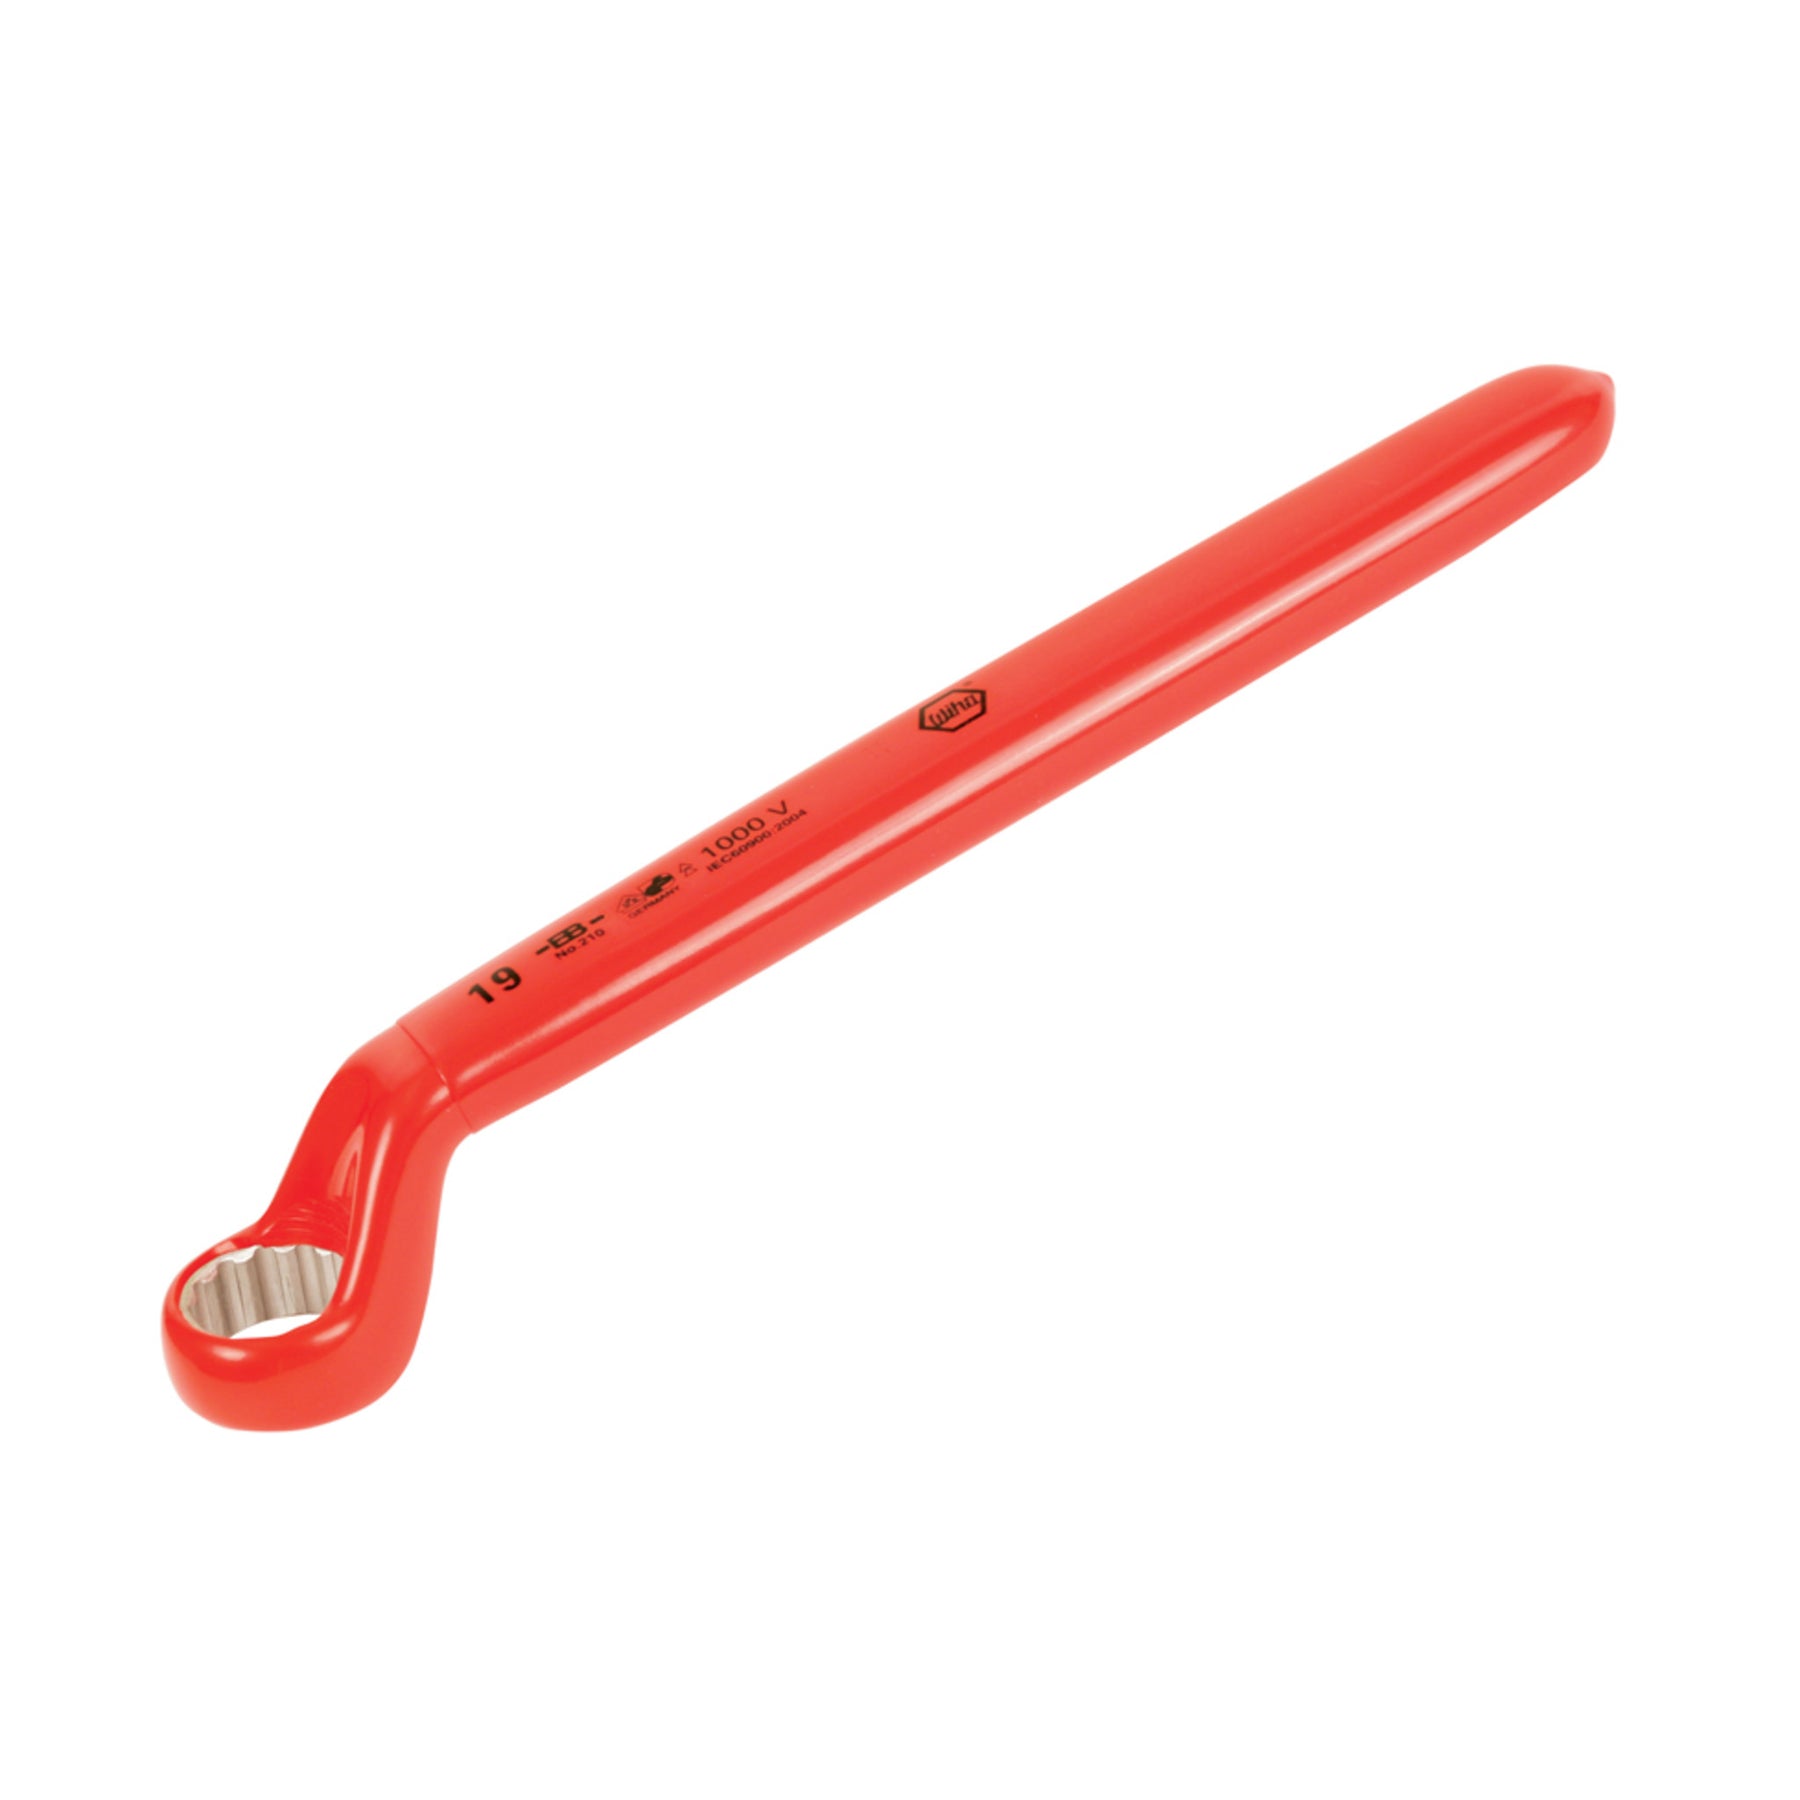 Insulated Deep Offset Wrench 10mm